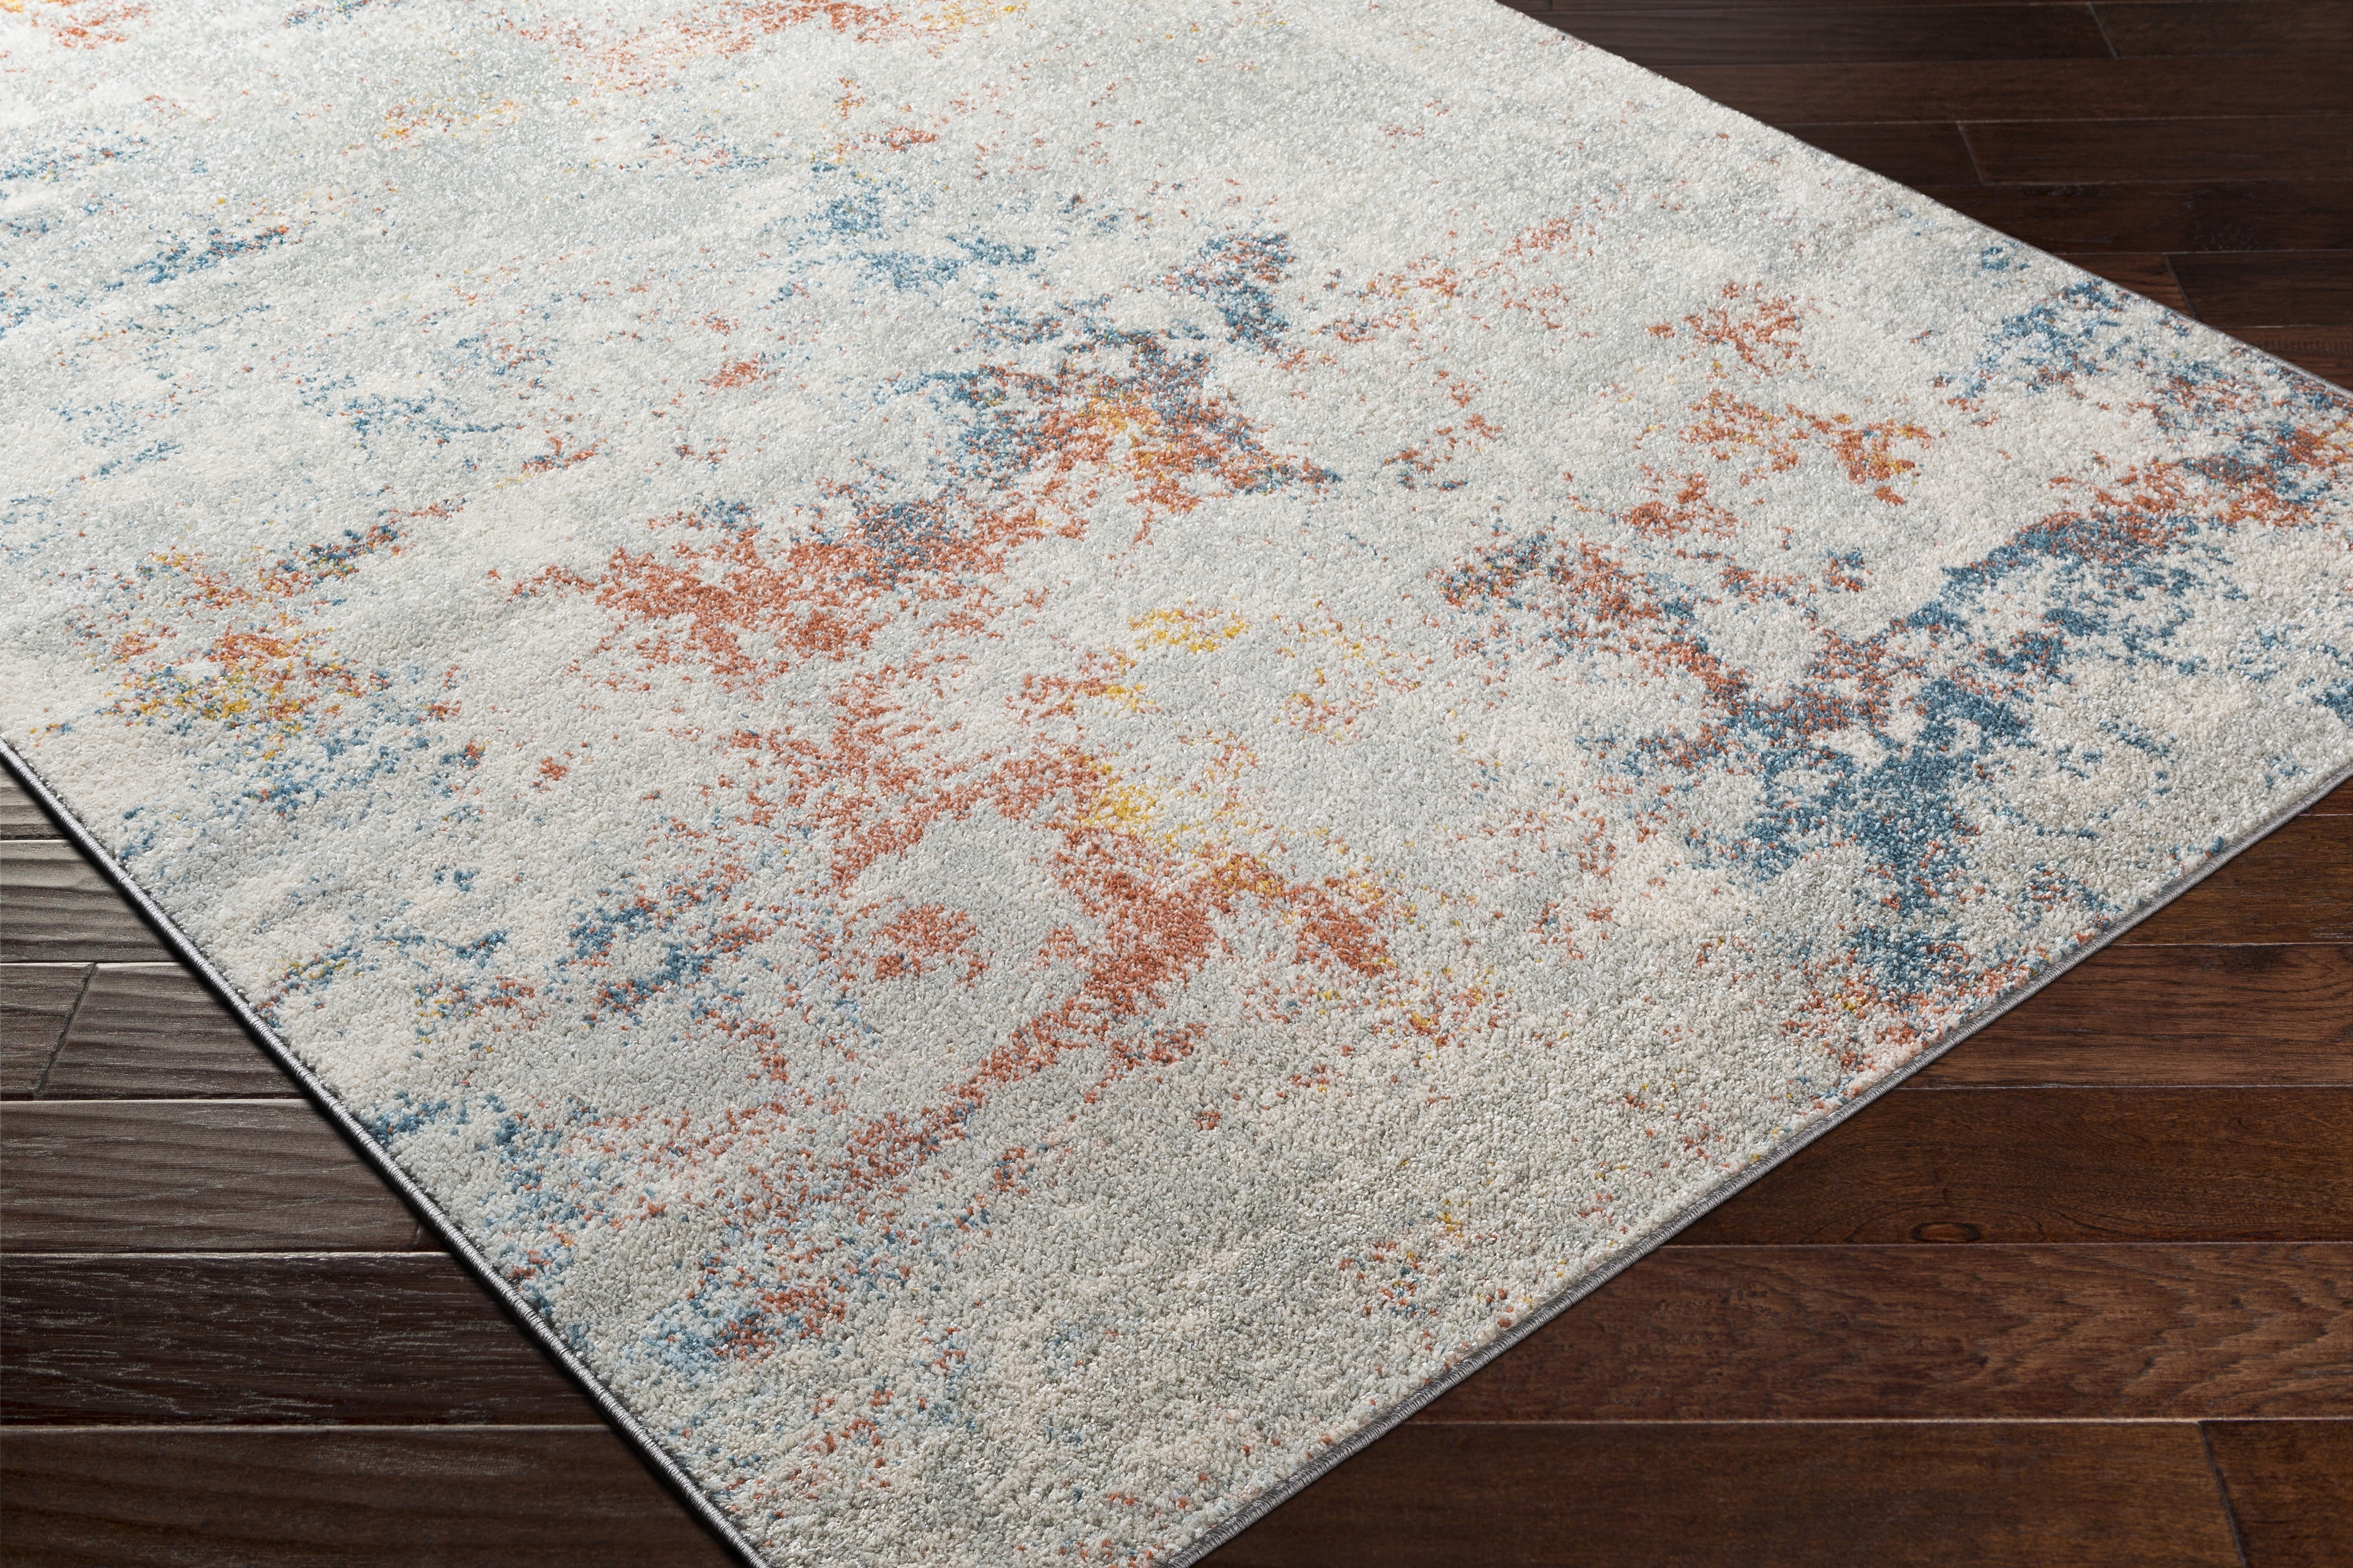 Chester Rug, 5'3" x 7'3" - Image 6